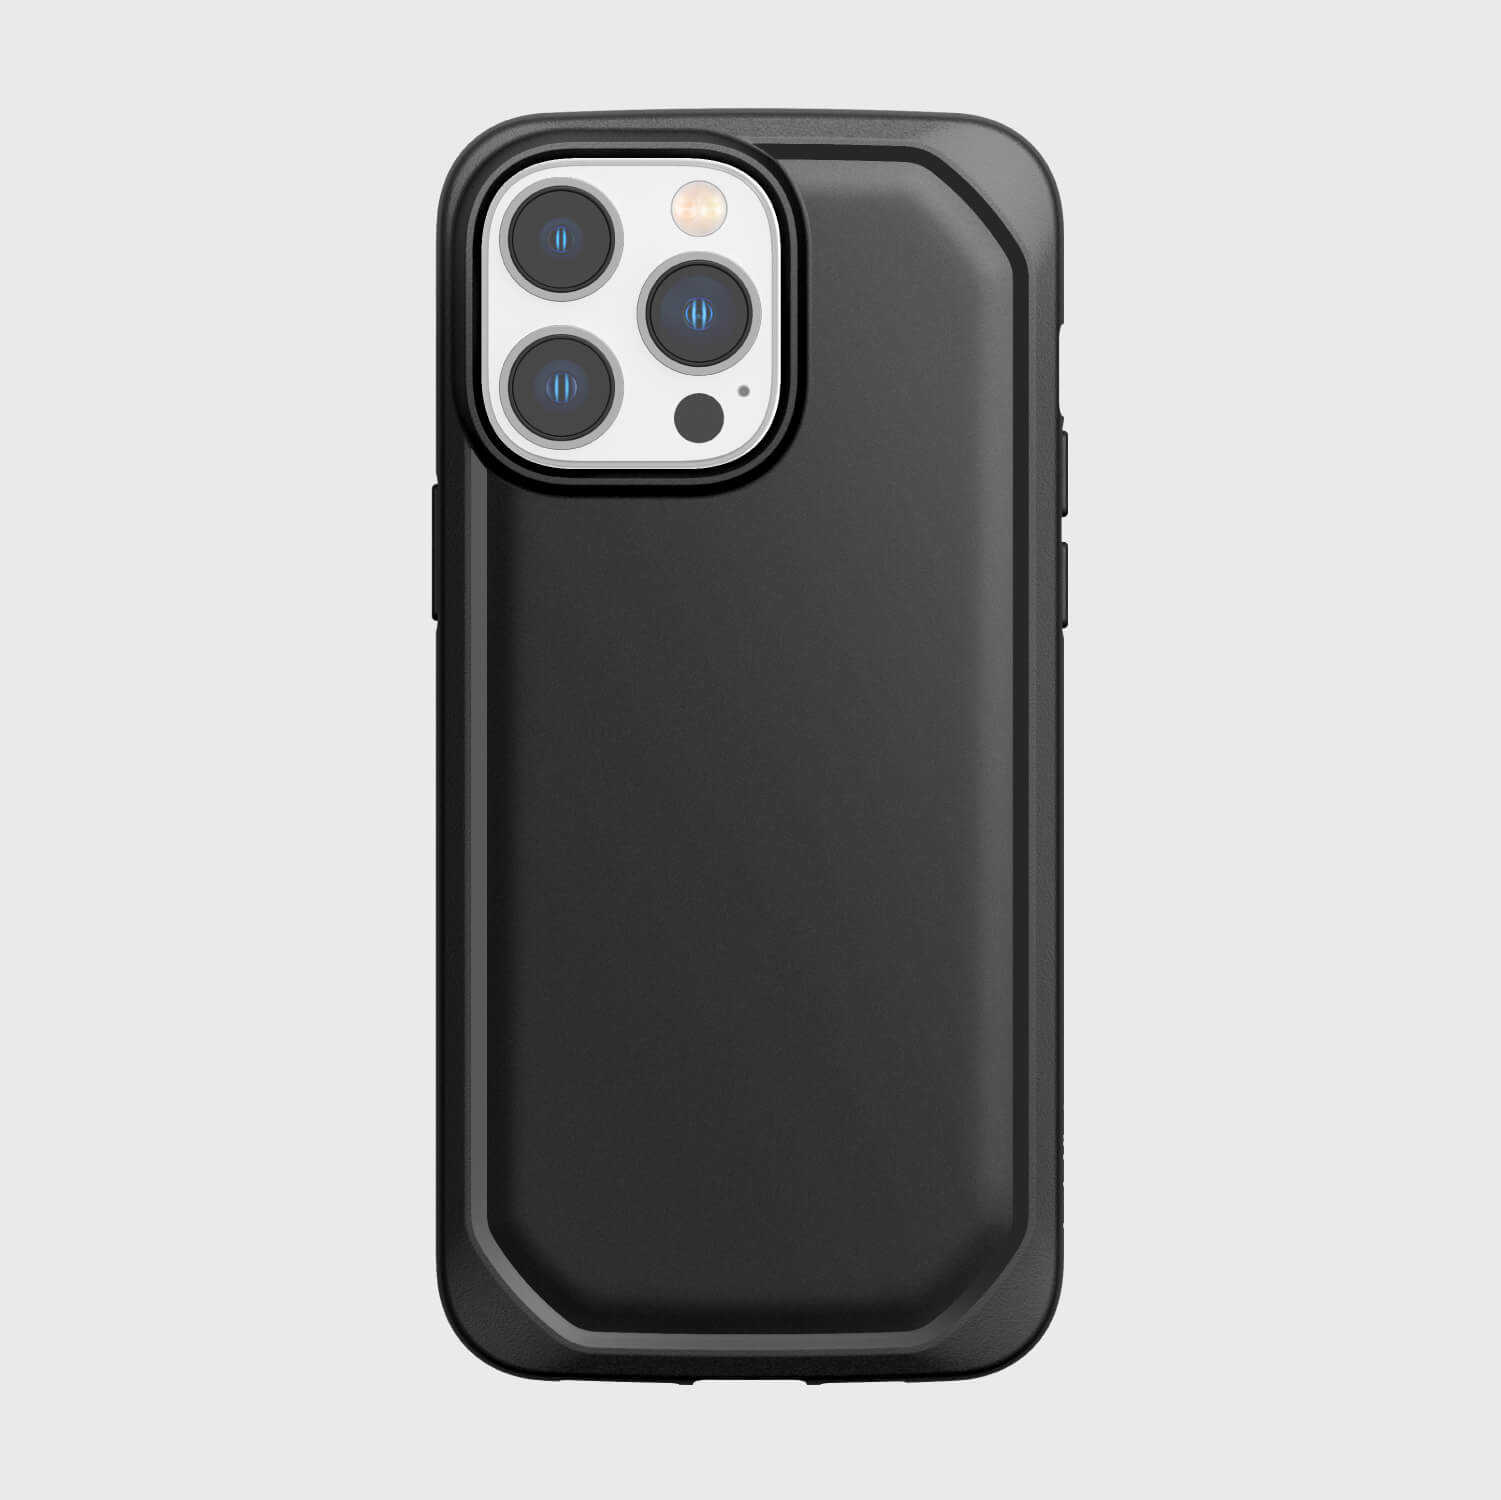 The environmentally friendly black iPhone 14 Pro Max Case - Raptic Slim & Sleek is shown on a white background.